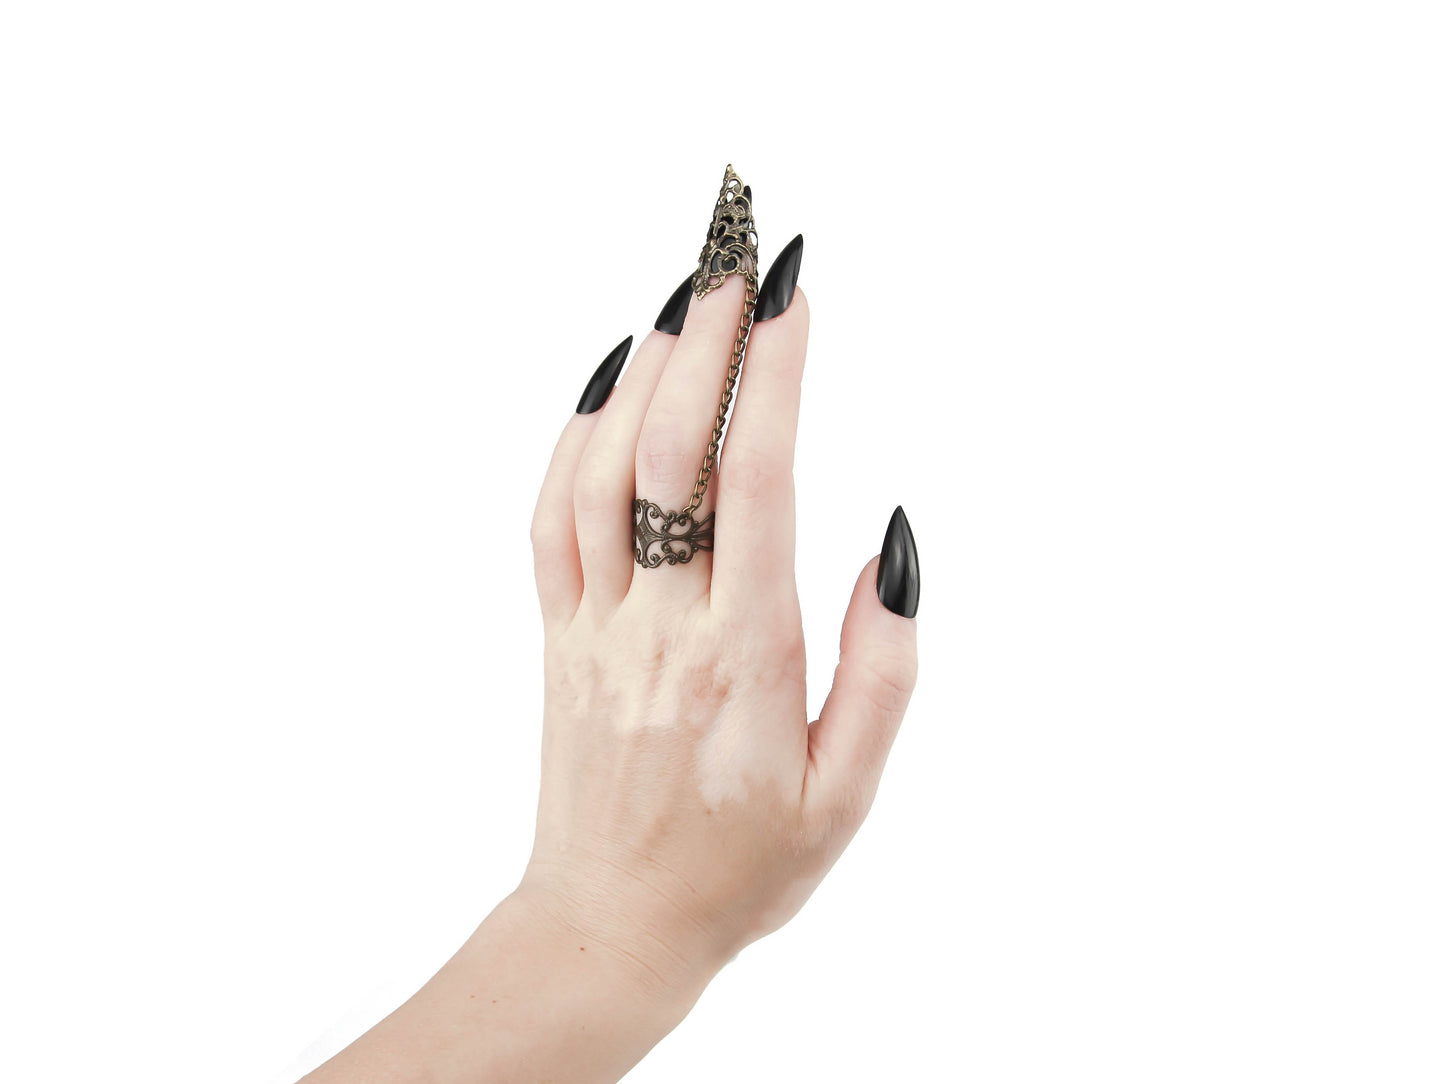 An avant-garde bronze ring with claw from Myril Jewels, featuring intricate gothic-inspired filigree design that exudes dark elegance. The chain connects a detailed ring to a matching claw over the nail, embodying the brand's commitment to sophisticated, futuristic gothic style. Ideal for those who appreciate gothic-chic, Neo Gothic, and Witchcore aesthetics, this piece is perfect for everyday wear, Halloween, or as a statement accessory for rave parties and festivals.